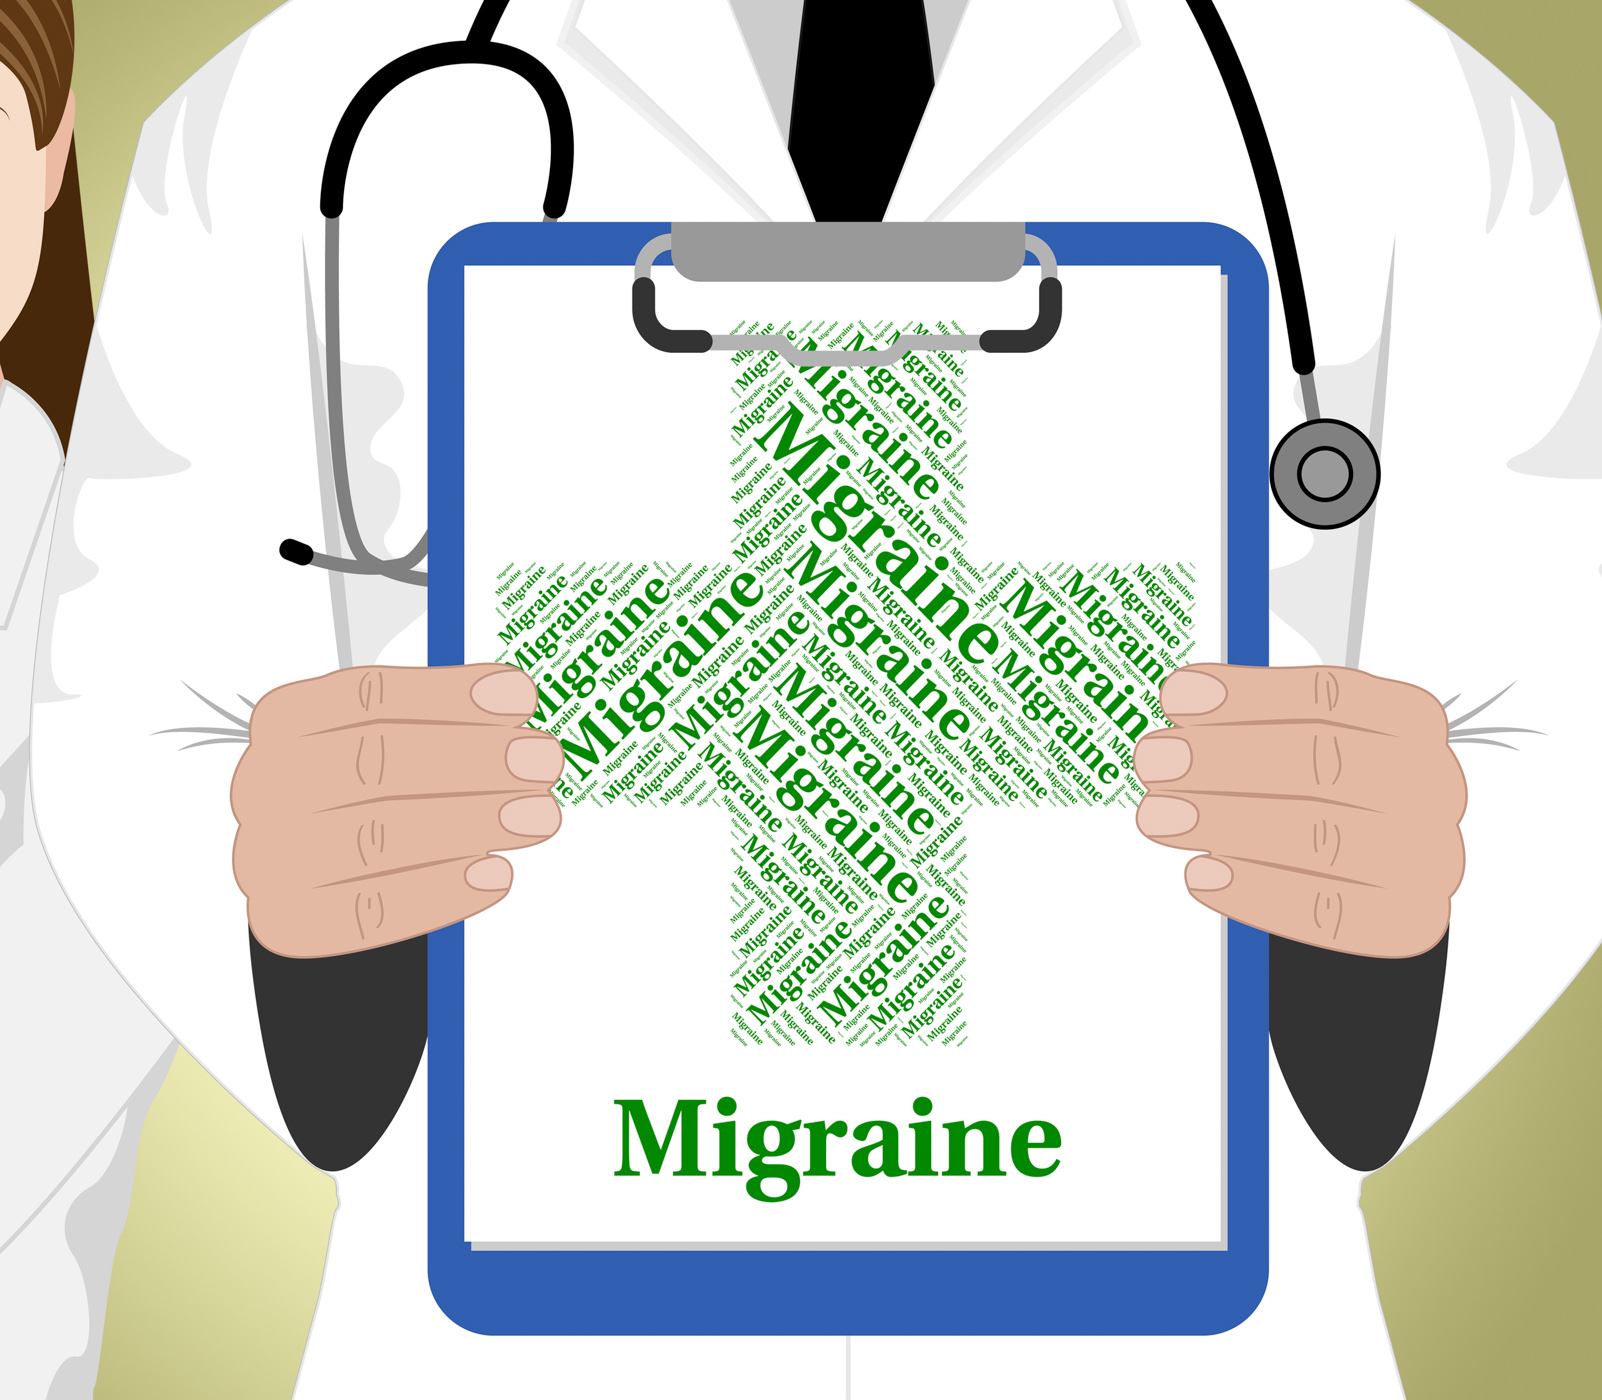 Migraine word represents ill health and affliction photo